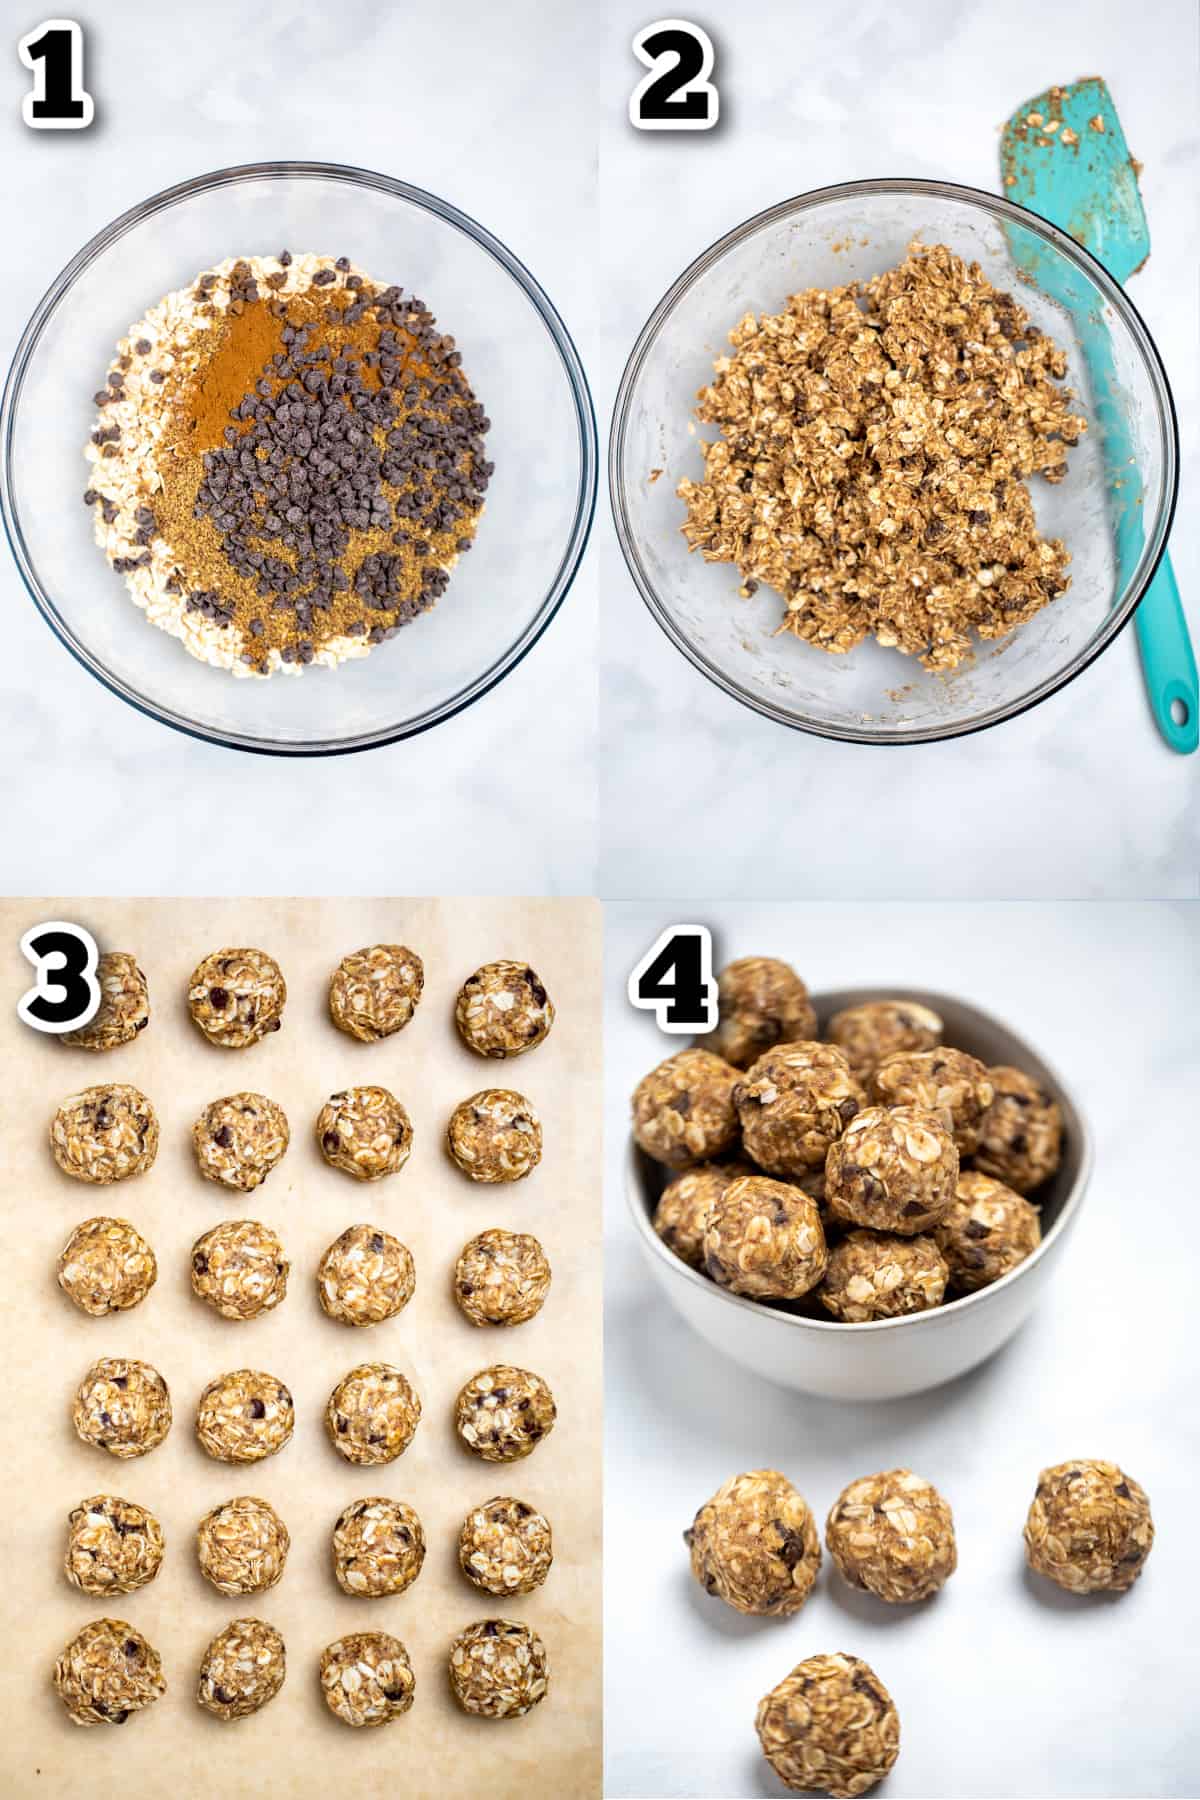 Step by step photos for how to make peanut butter oat balls.